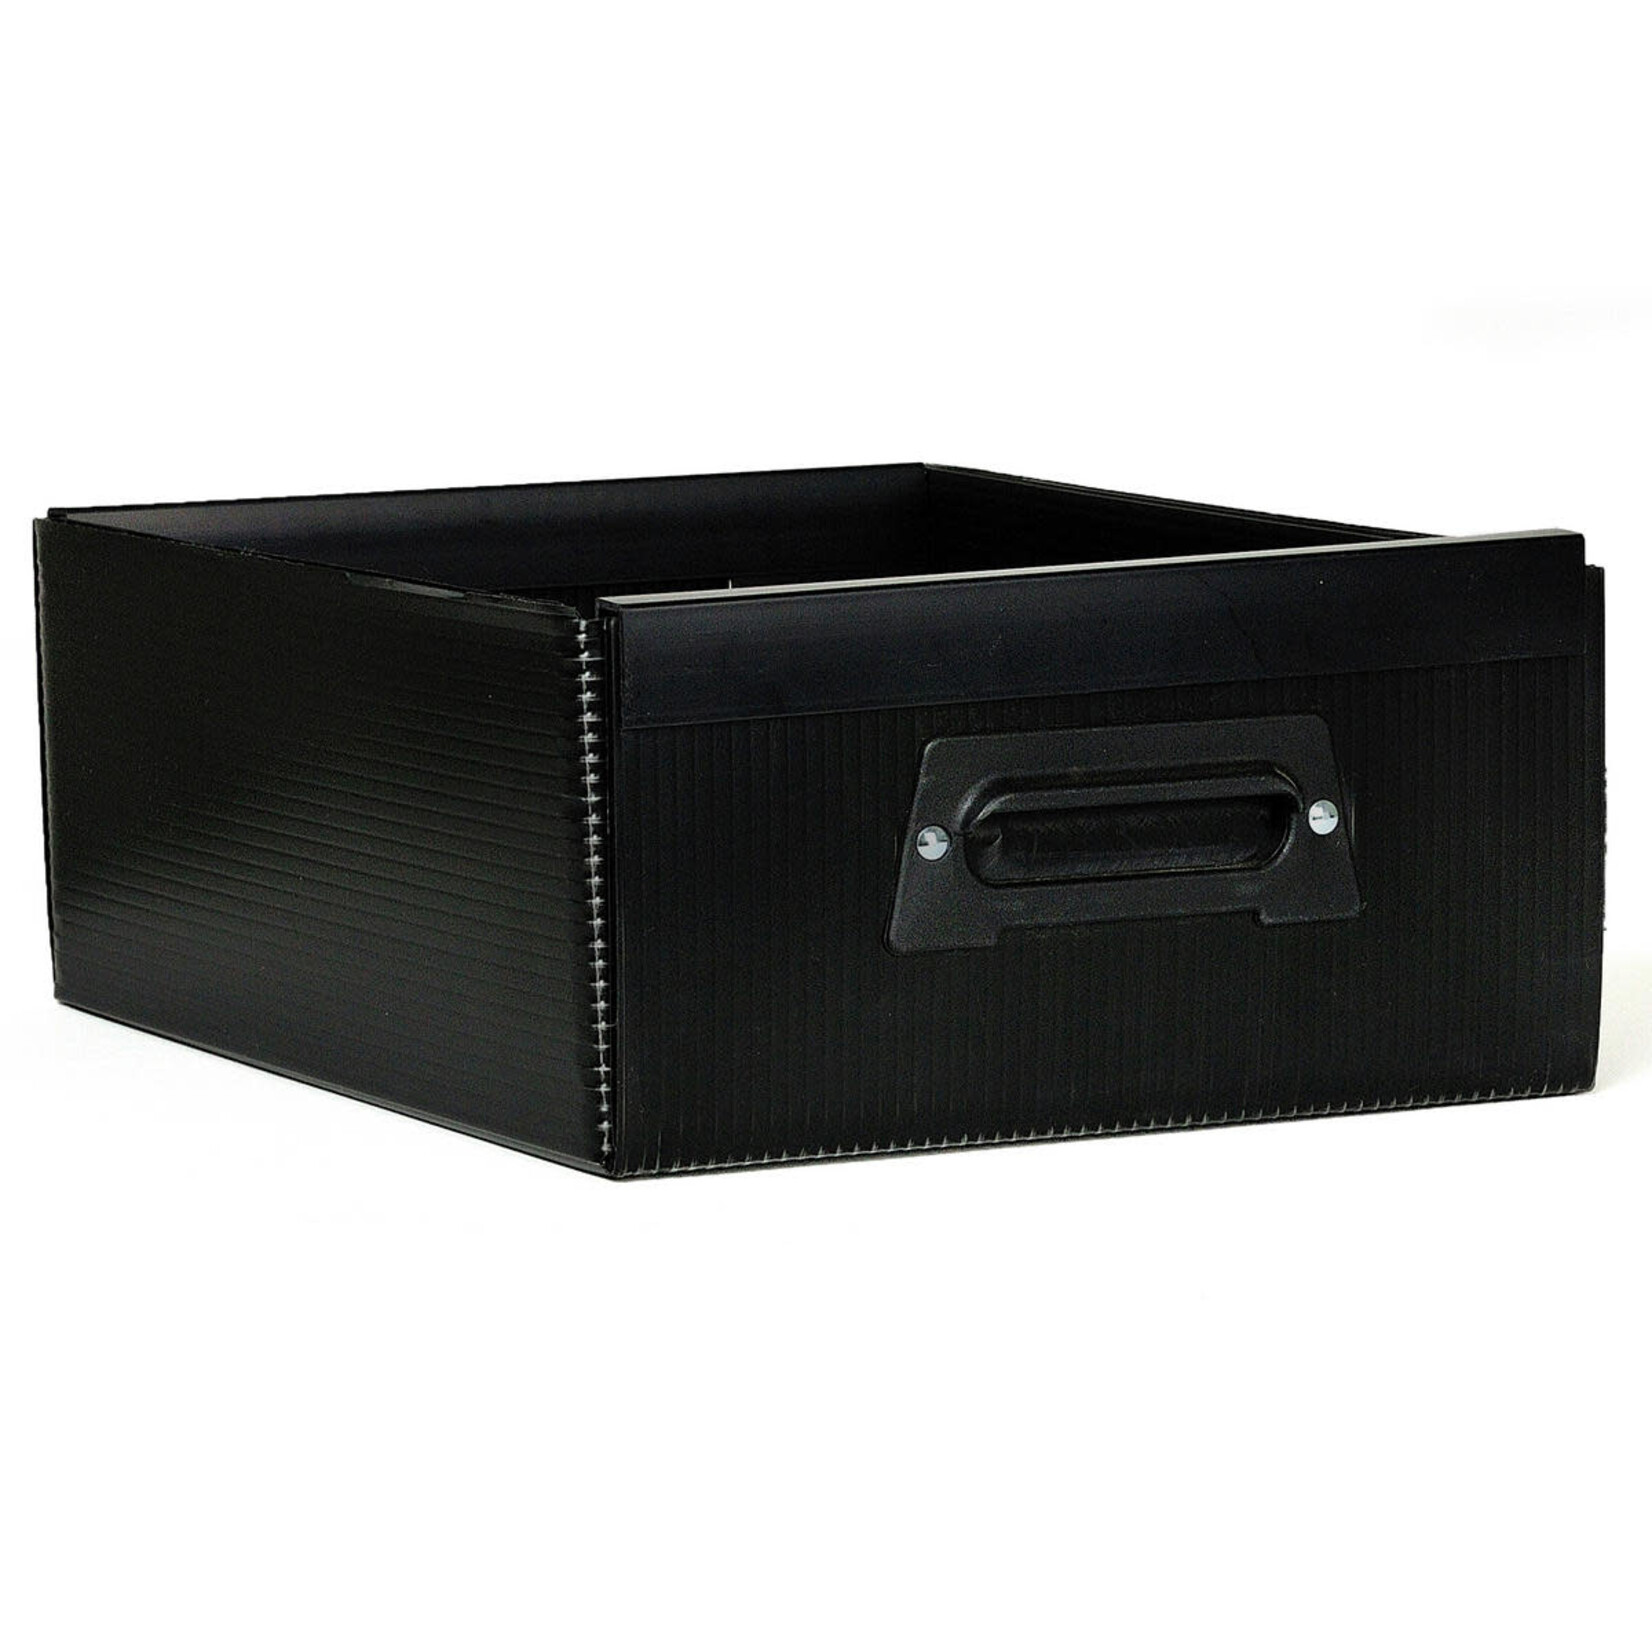 ProTek RC P-8 Small Replacement Drawer